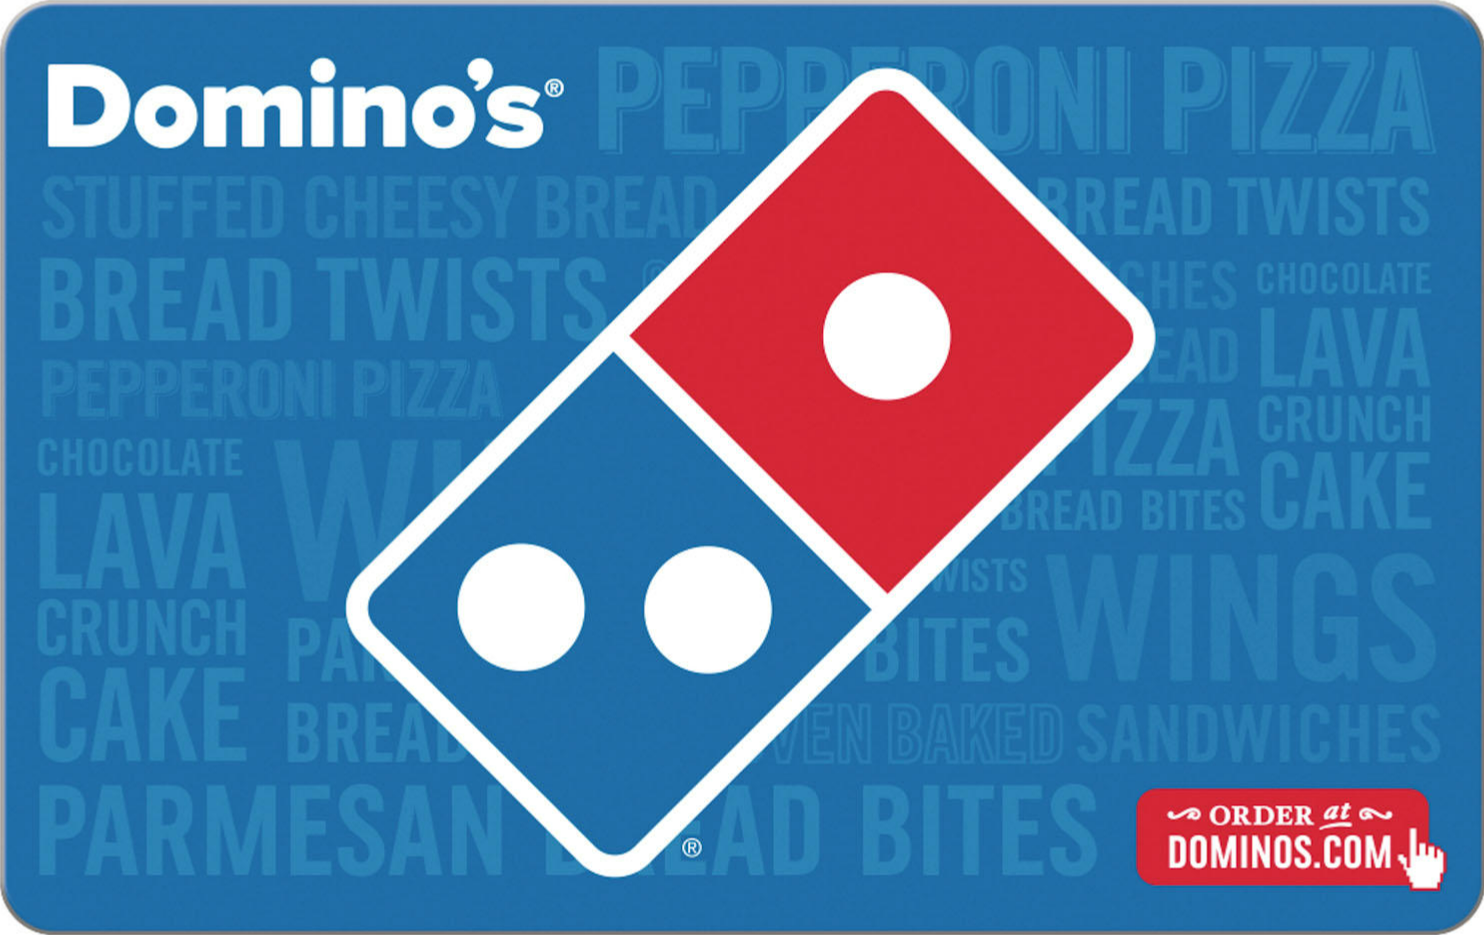 Domino's gift cards $100 value (4X$25 cards) for $75 at Sam's Club back in stock $75.00